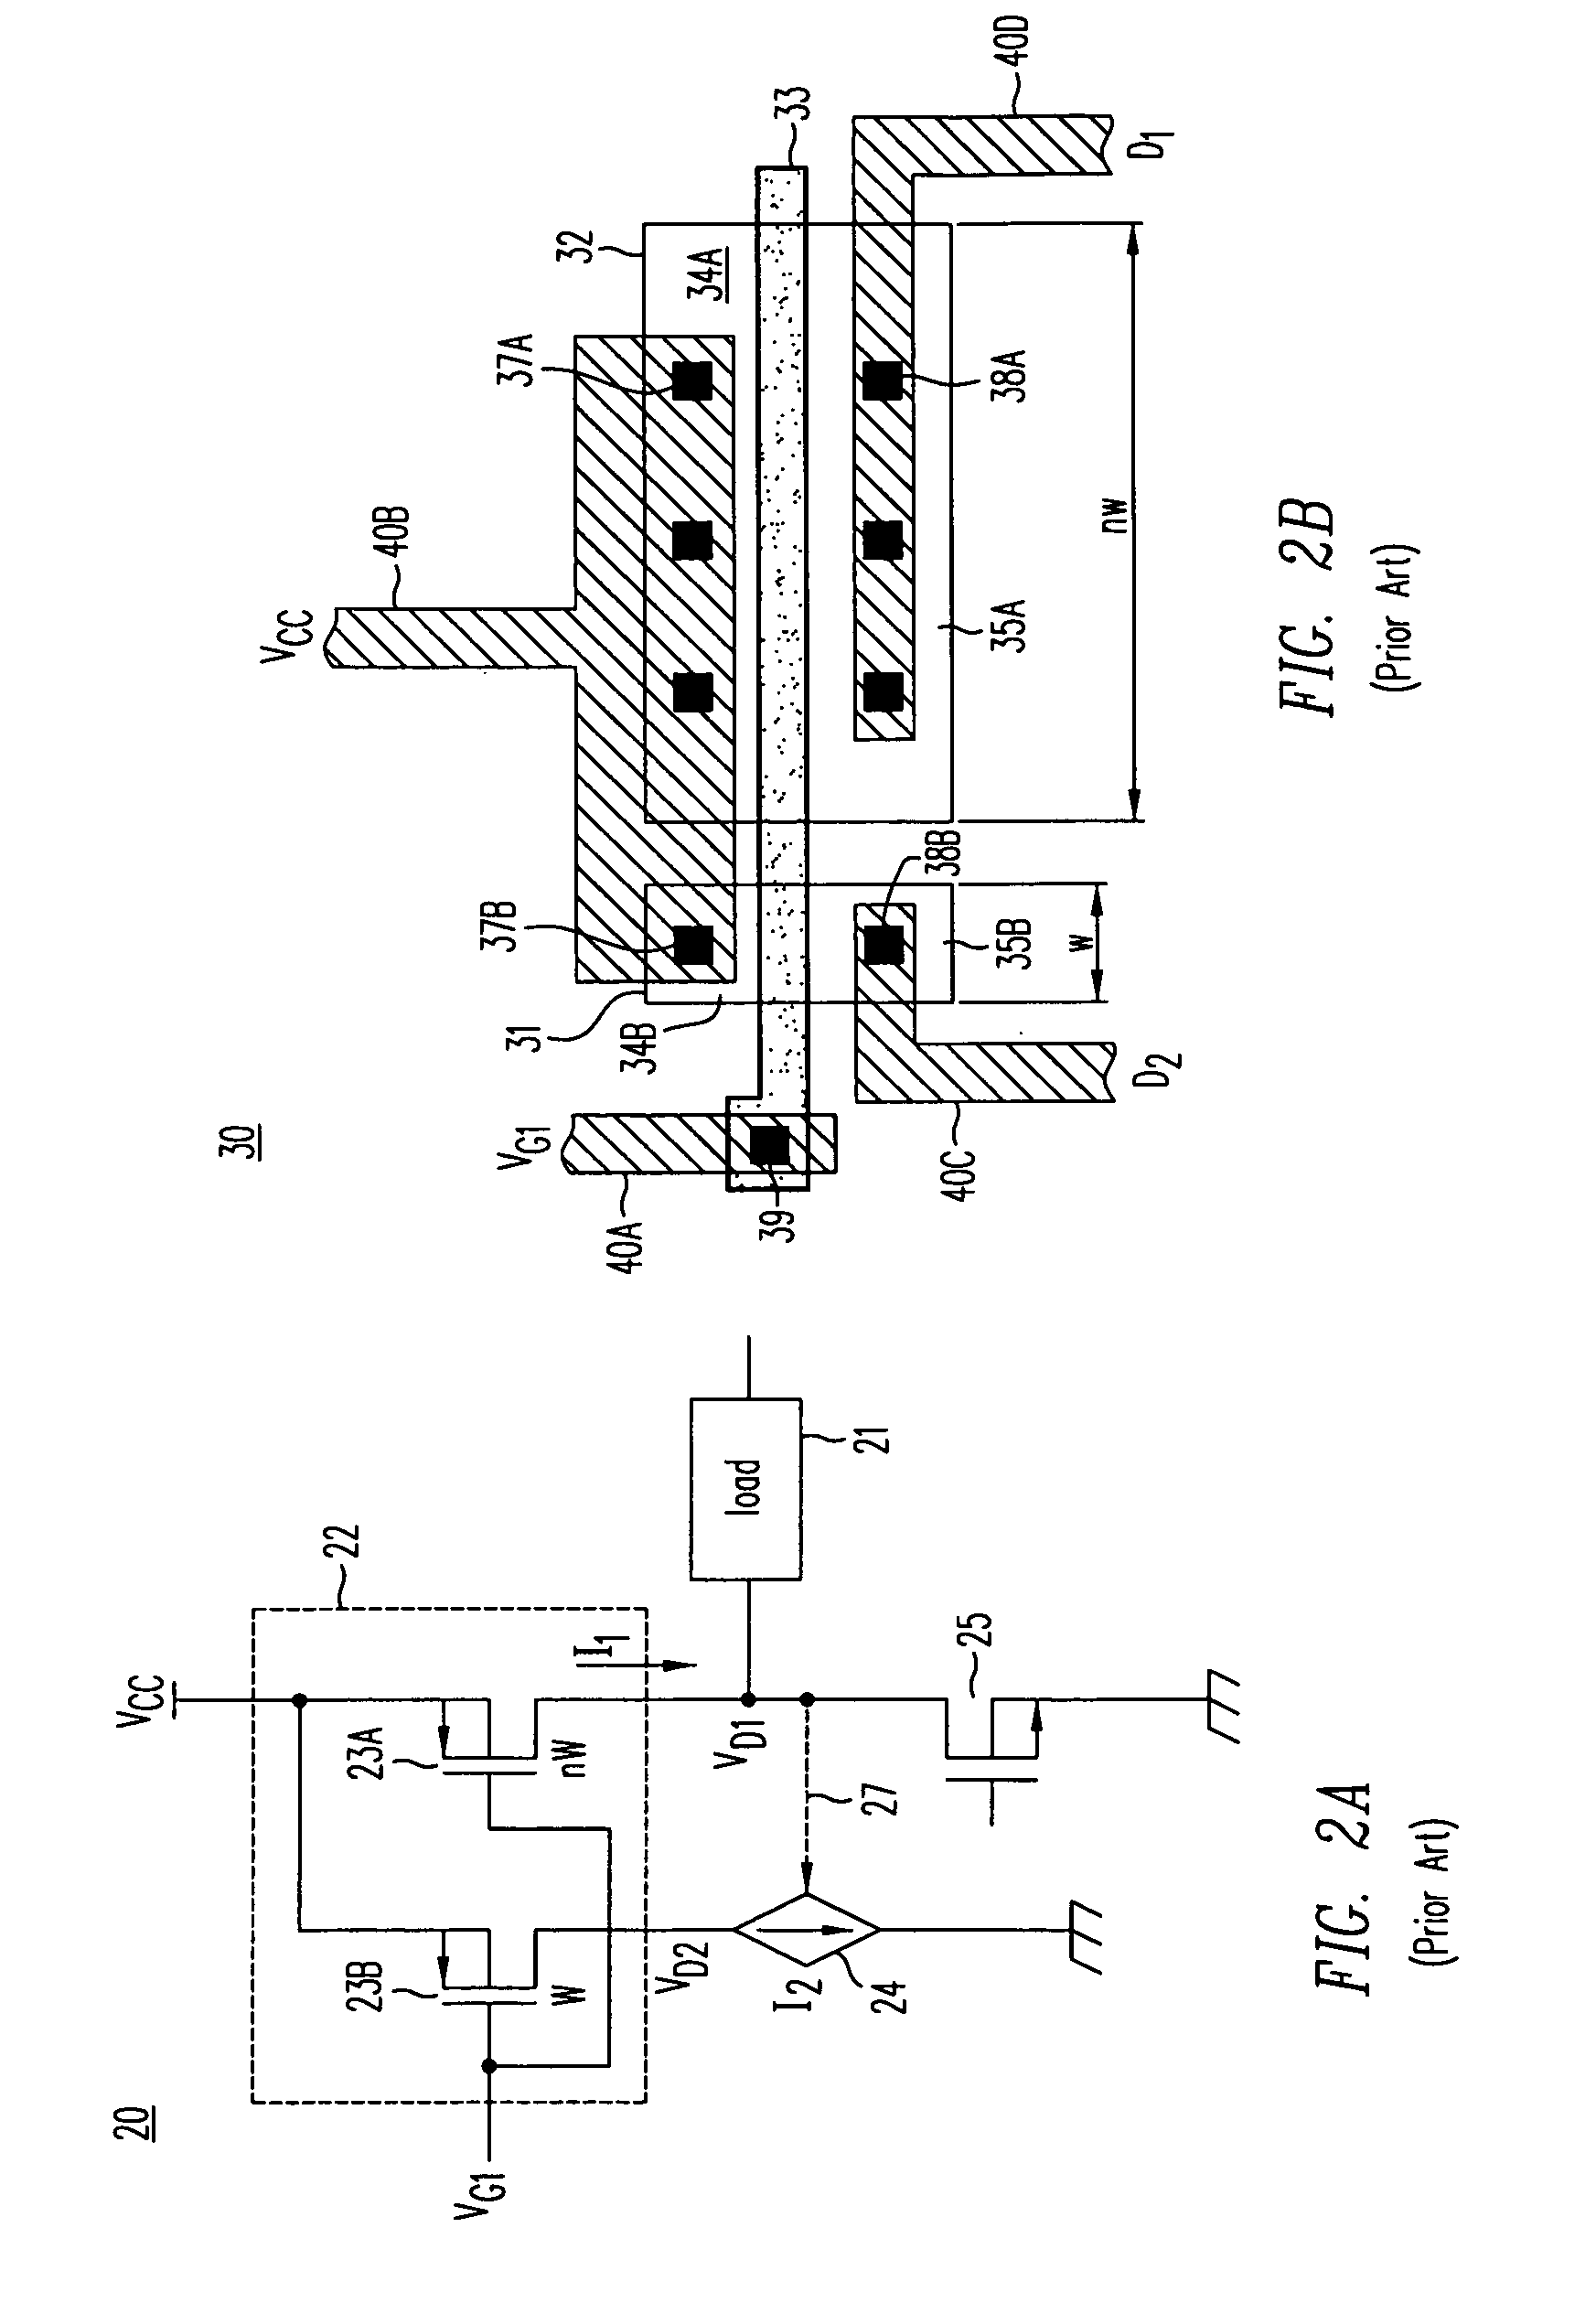 Cascode current sensor for discrete power semiconductor devices